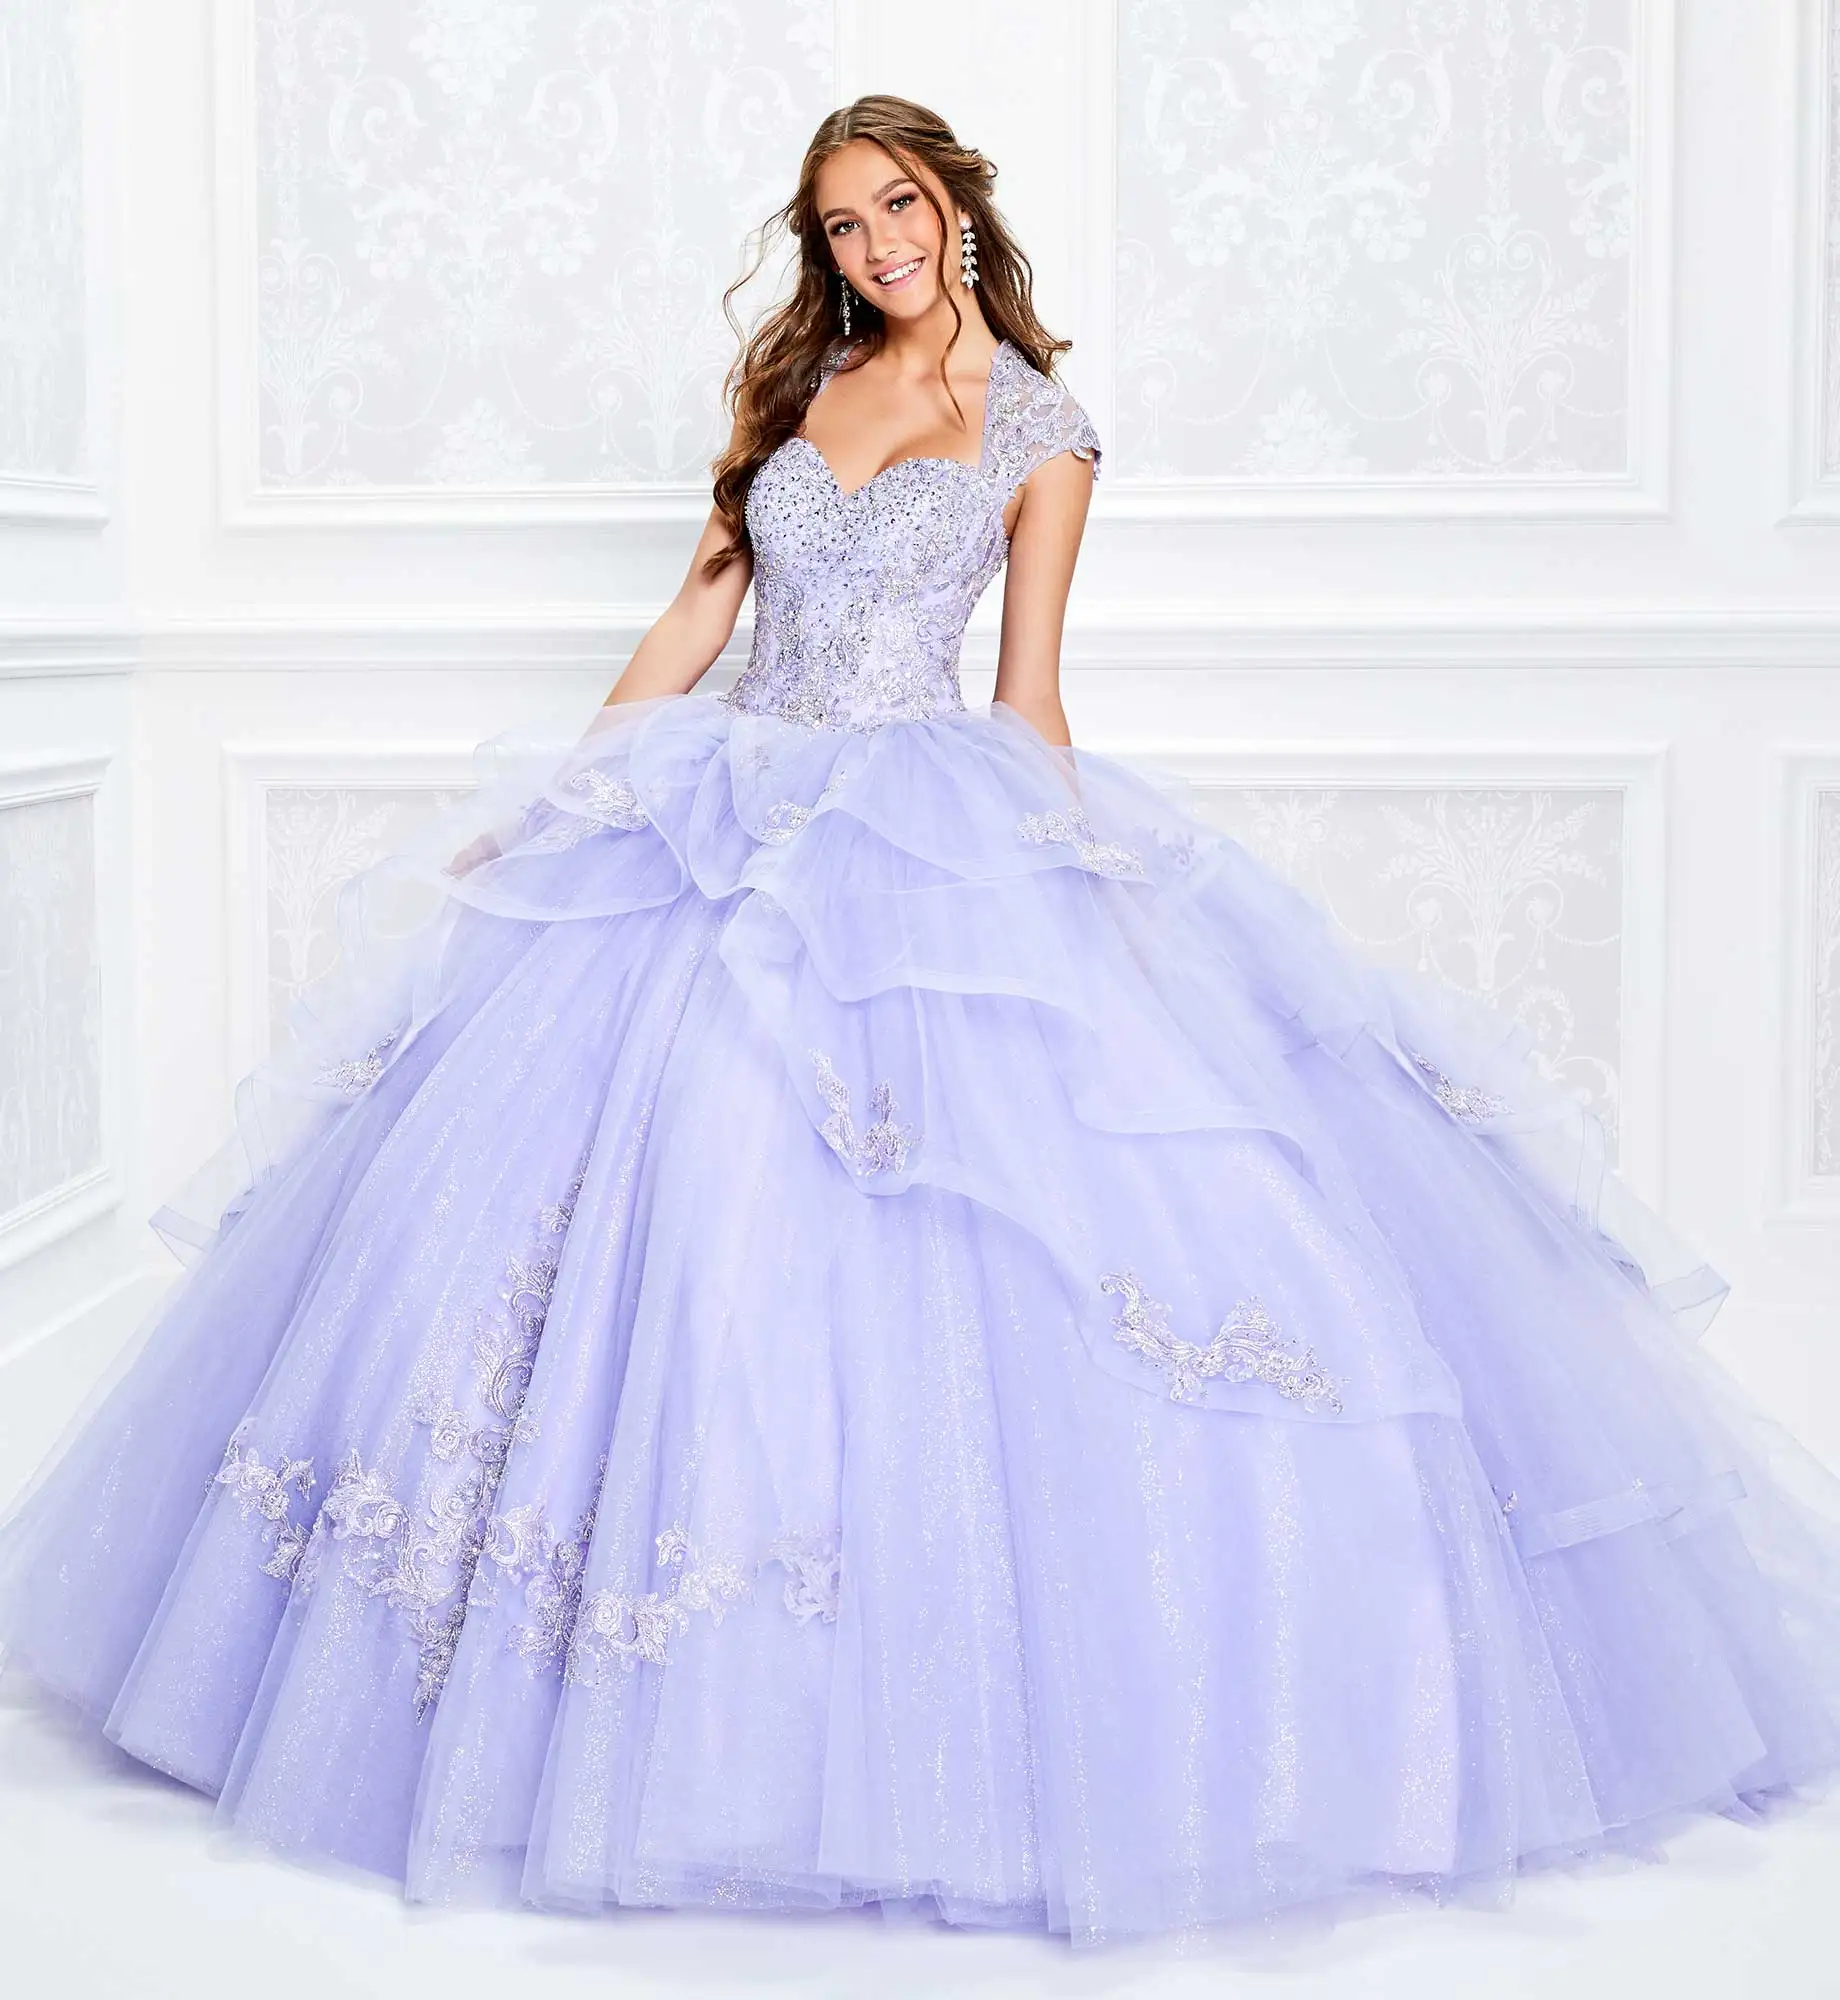 

Lilac Quinceanera Dresses Ball Gown Sweetheart Tulle Appliques Beaded Puffy Mexican Sweet 16 Dresses Charro 15 Anos